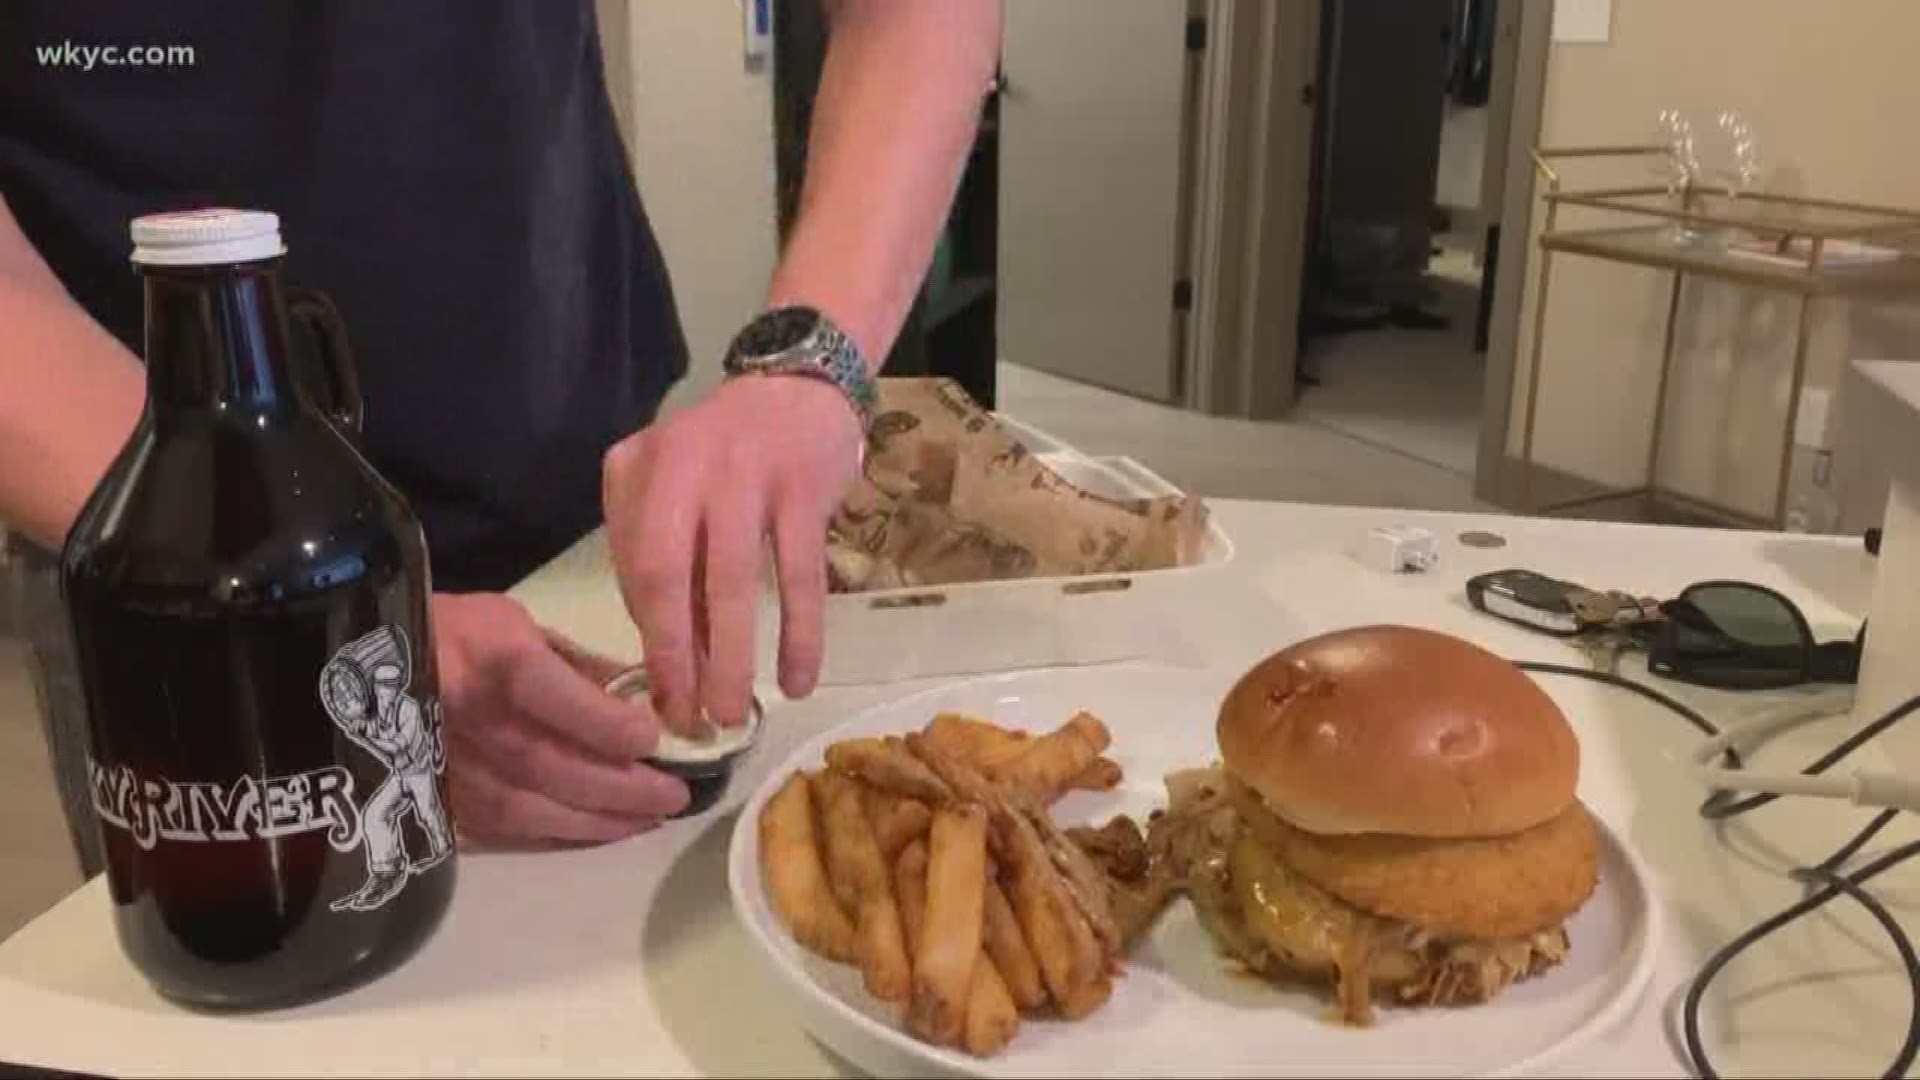 Hungry? Austin Love tried some takeout from Rocky River Brewing Company in honor of 'Takeout Tuesday.'